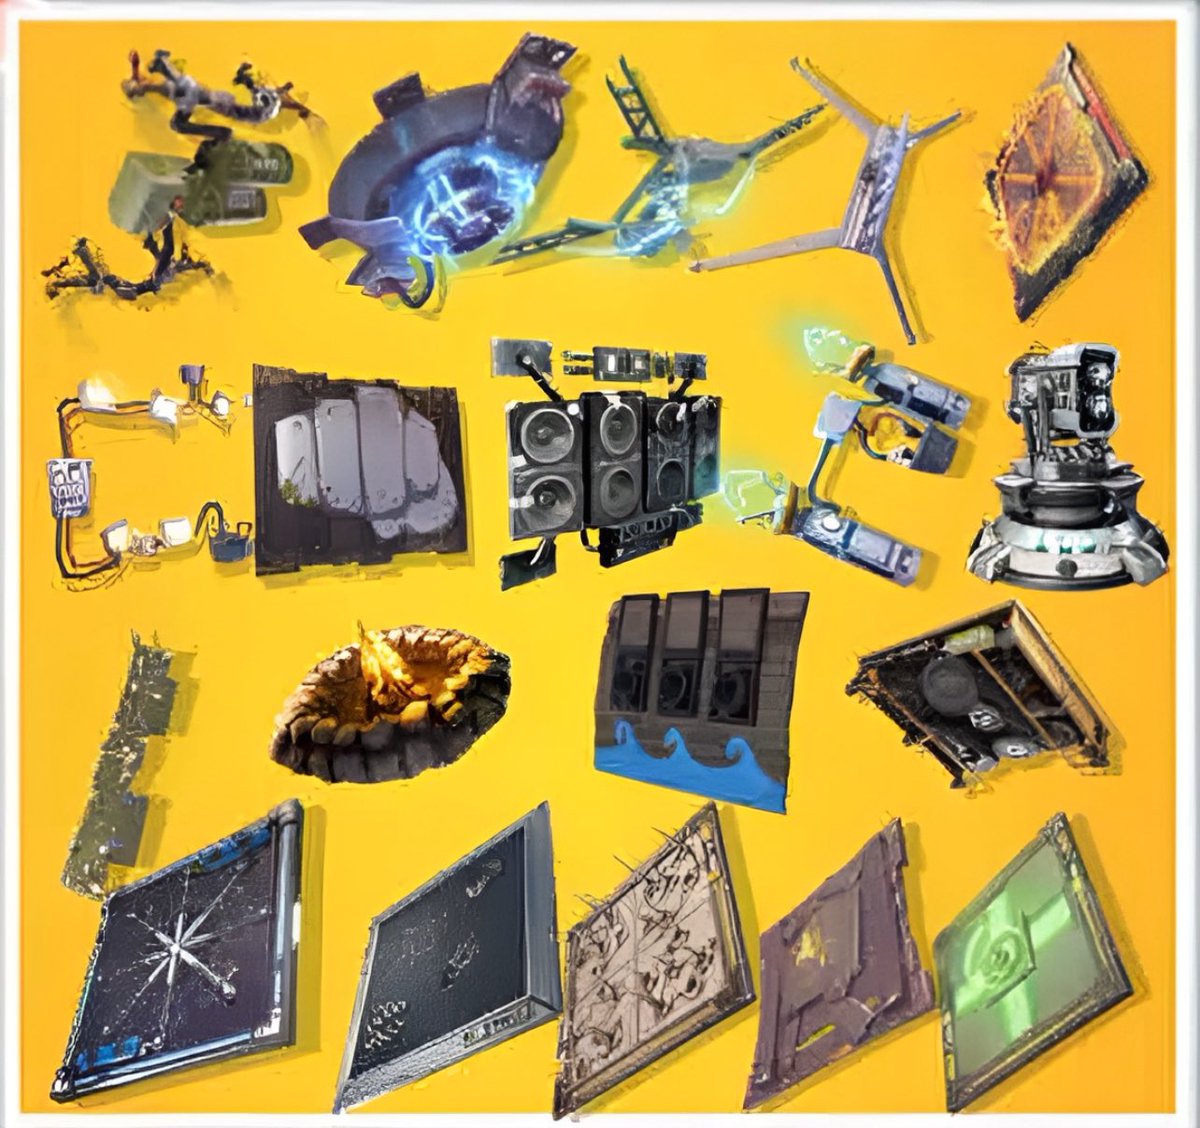 #GiveawayAlert💢
Enter to have a chance to win #Fortnite STW TRAPS 
(1 winner) 

Ends after 5 min

1-Follow @krch852
2-Tag a friend
3-Add #KrchGiveaway

No purchase necessary Giveaway rule: Maximum 1 Entry

~X is not affiliated with nor responsible for this giveaway~